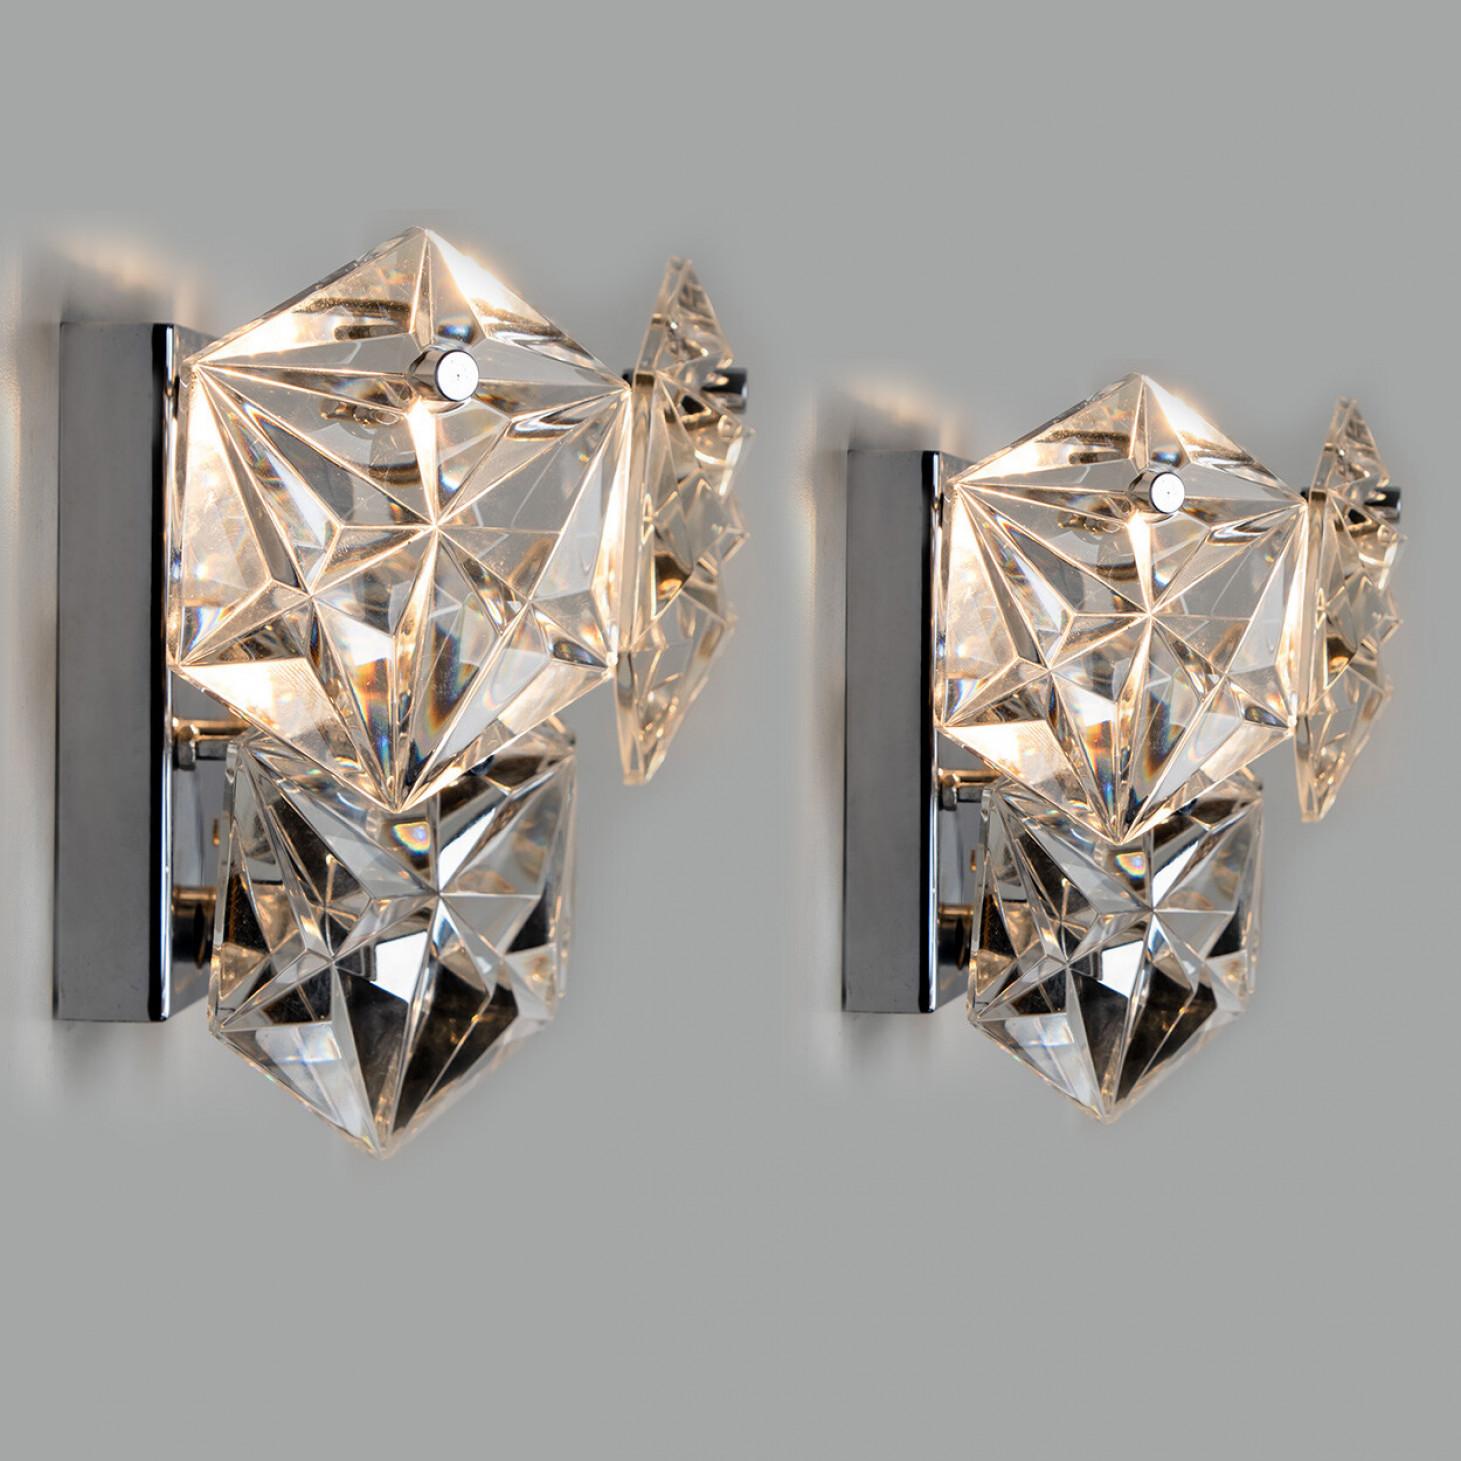 1 of the 2 Faceted Crystal and Silver Chrome Sconces by Kinkeldey, Germany, 1970 For Sale 4